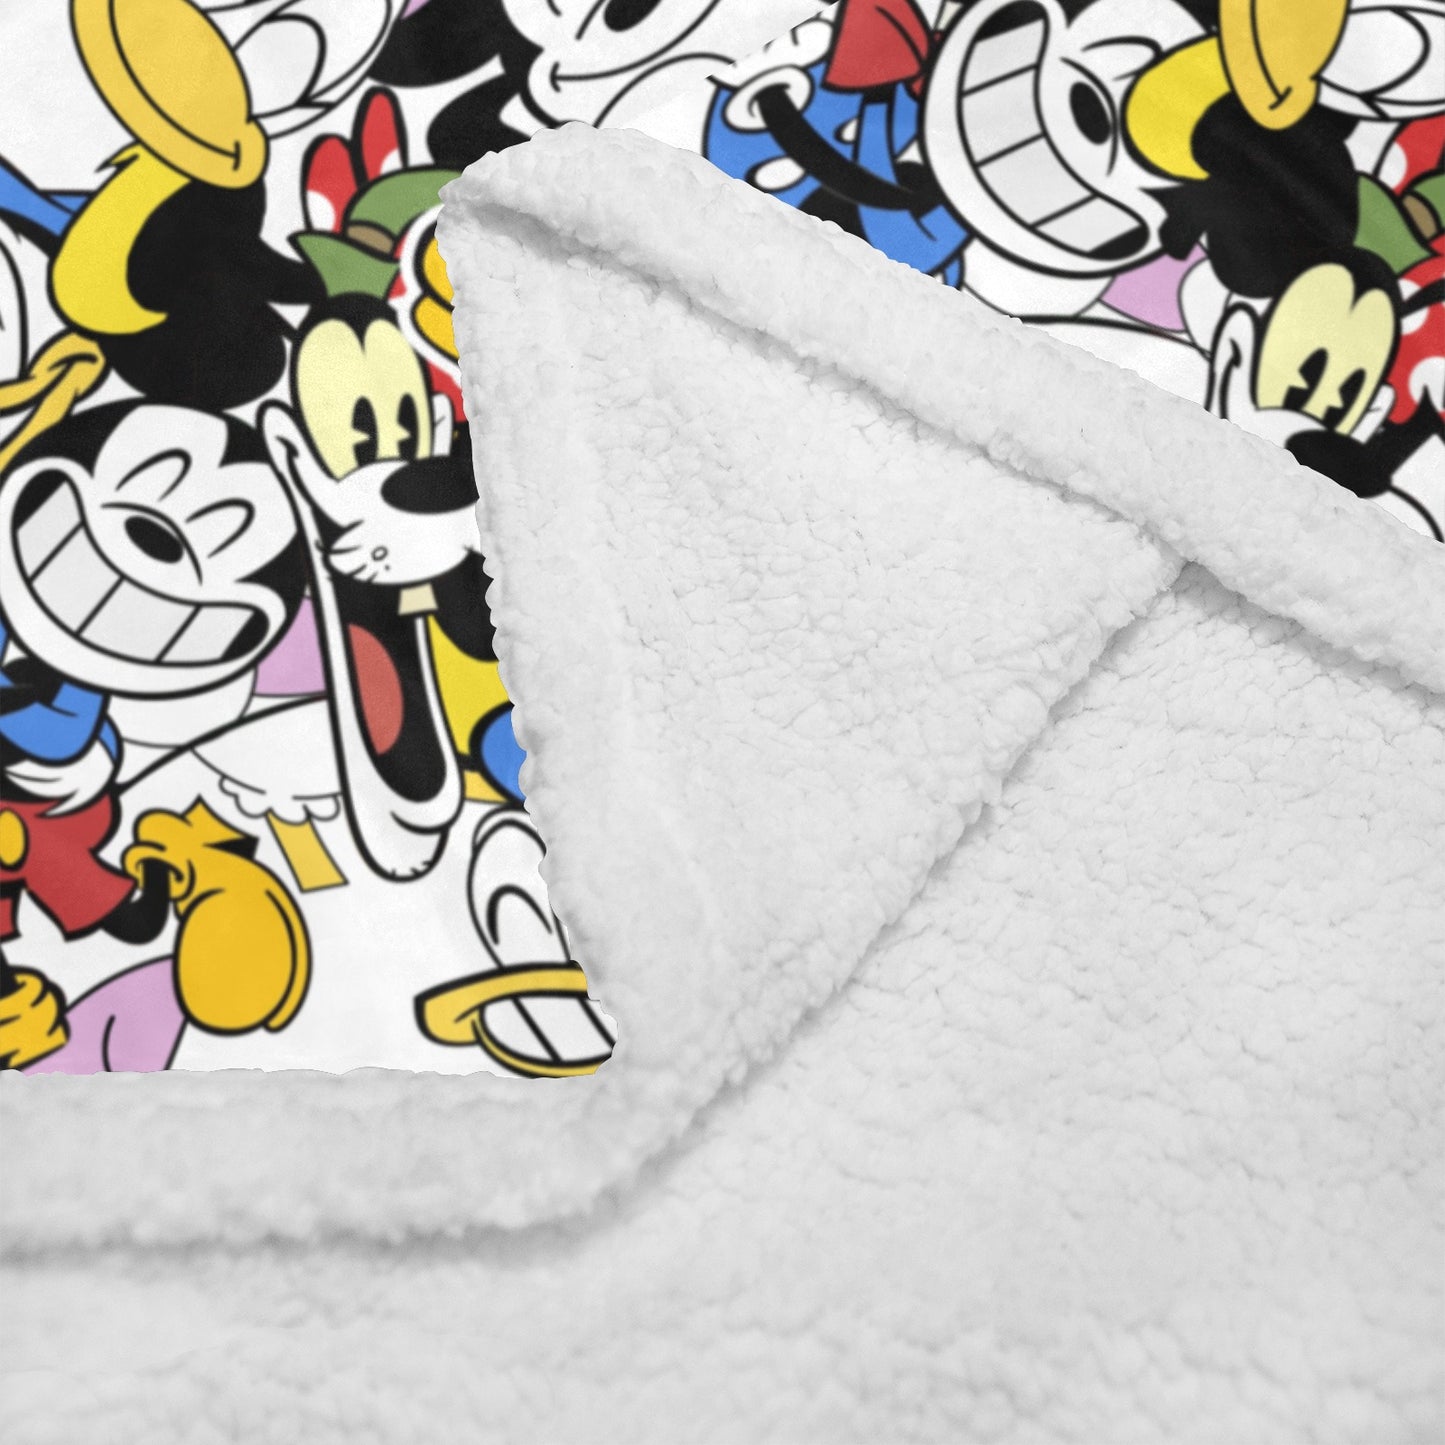 Mickey Mouse Double Layer Short Plush Blanket 50"X60" - Double Layer Short Plush Blanket 50"x60" - Zanlana Design and Home Decor